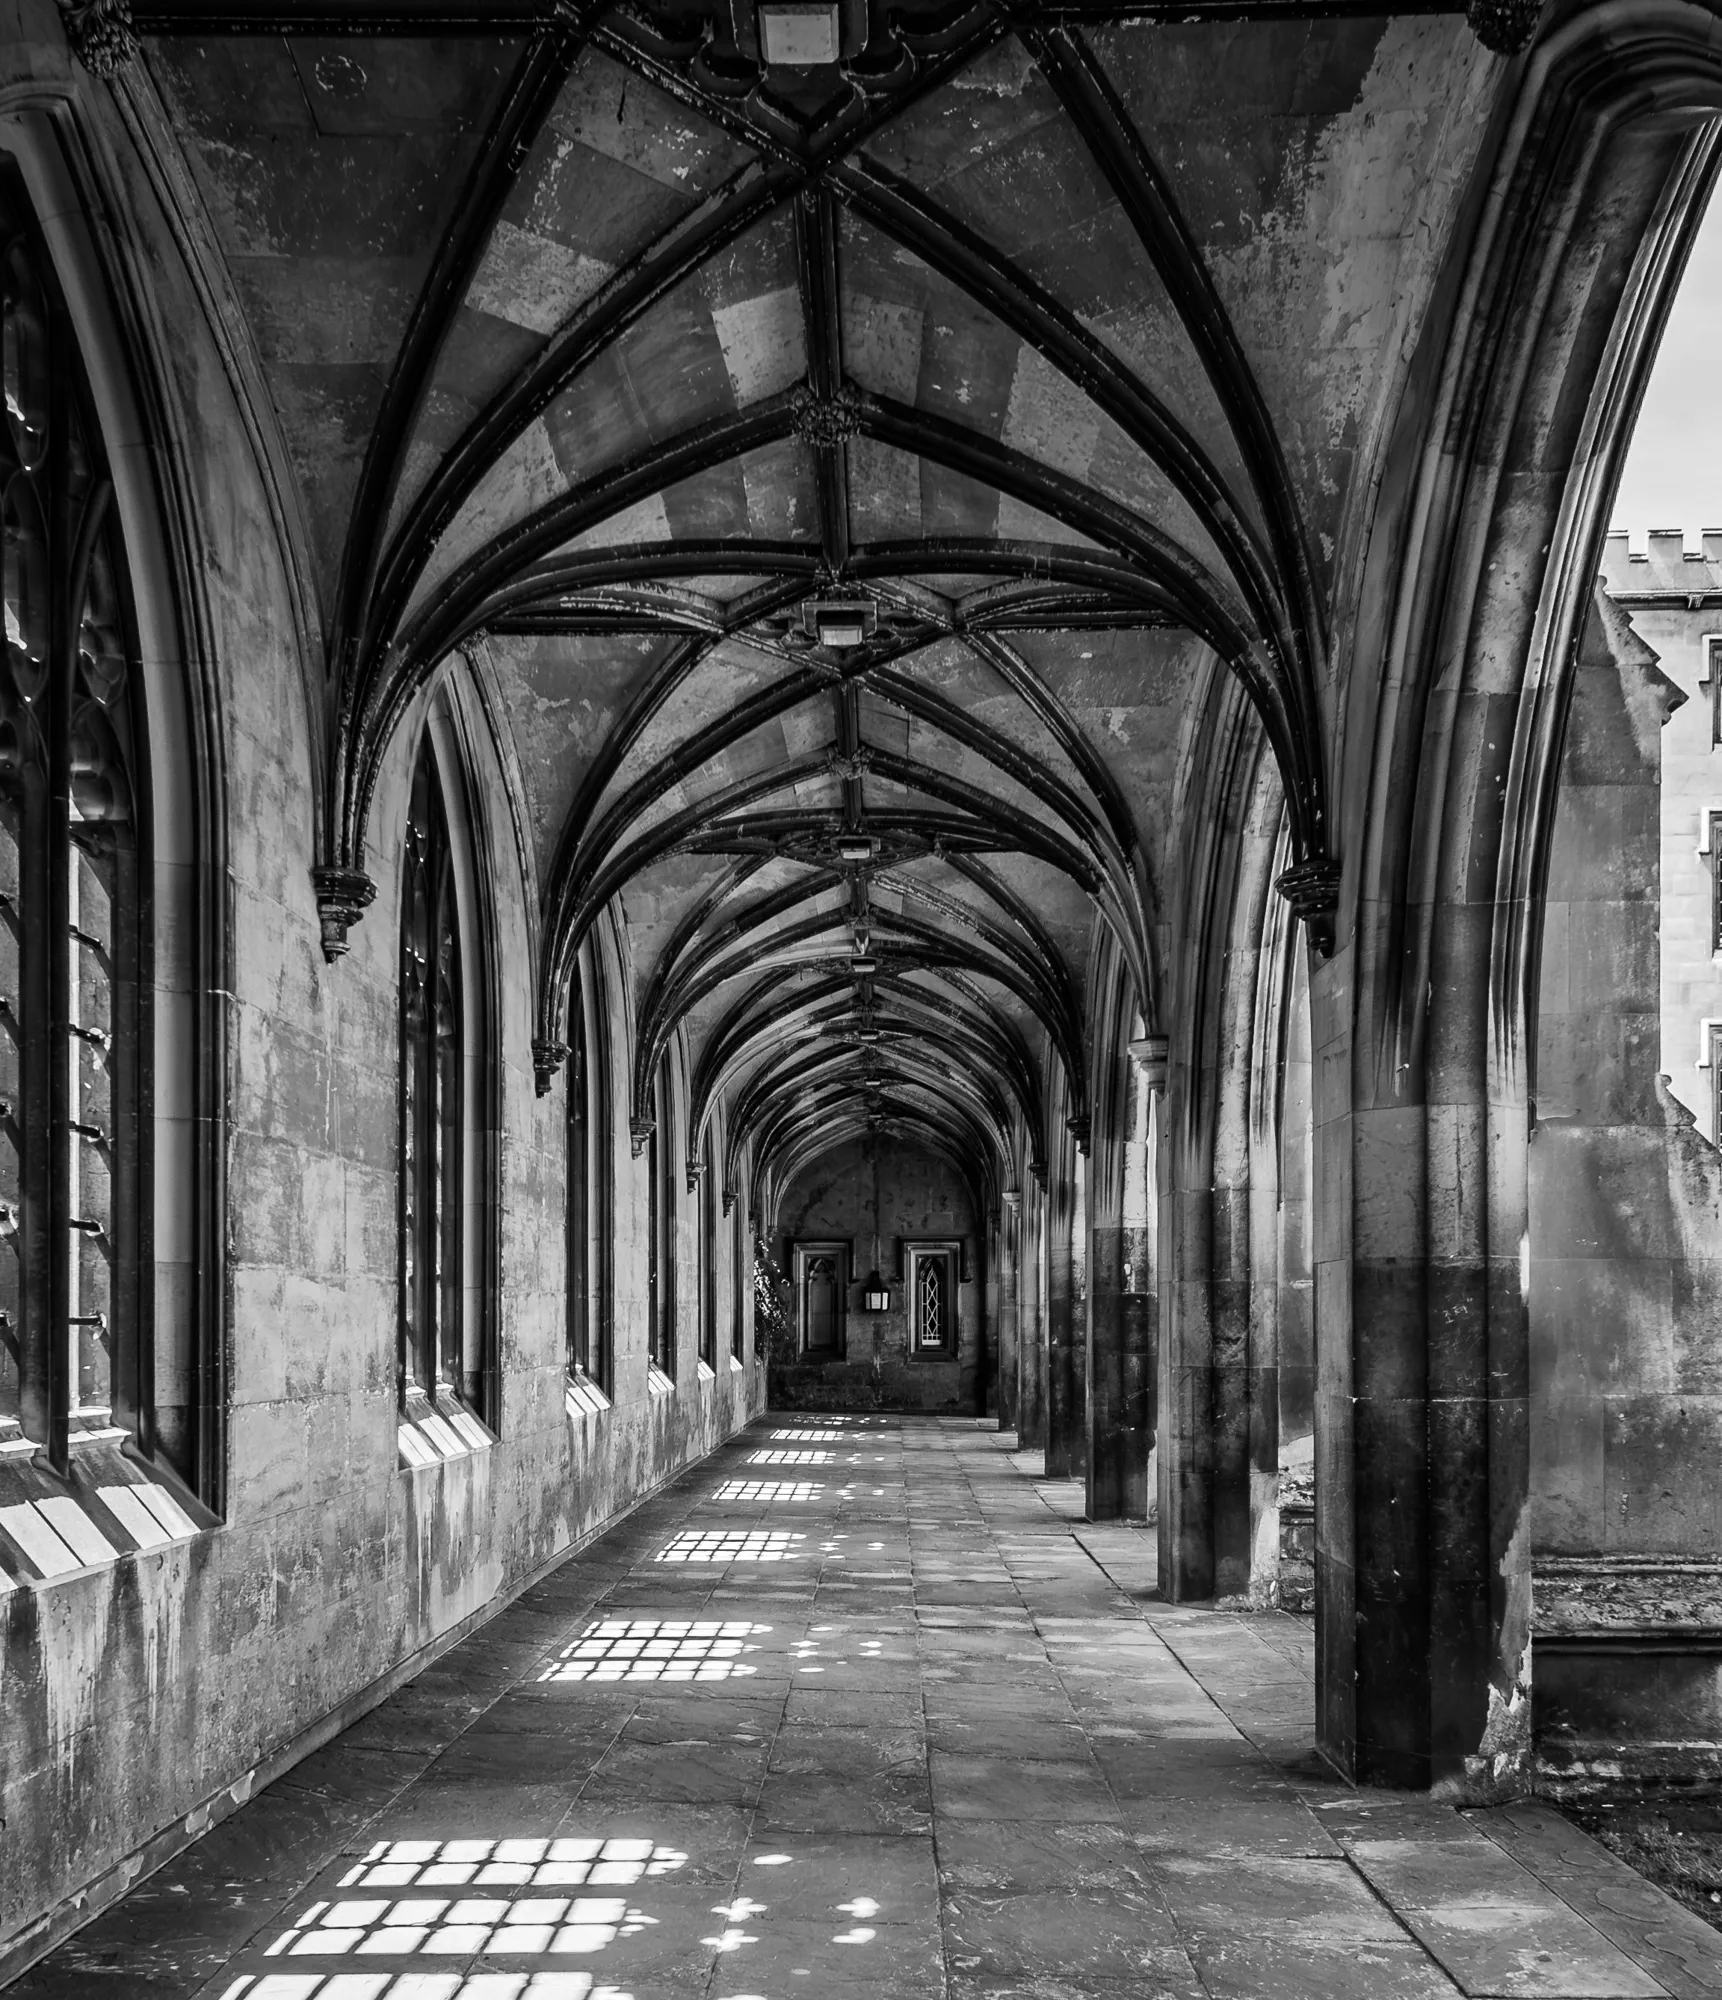 King's College Cloisters